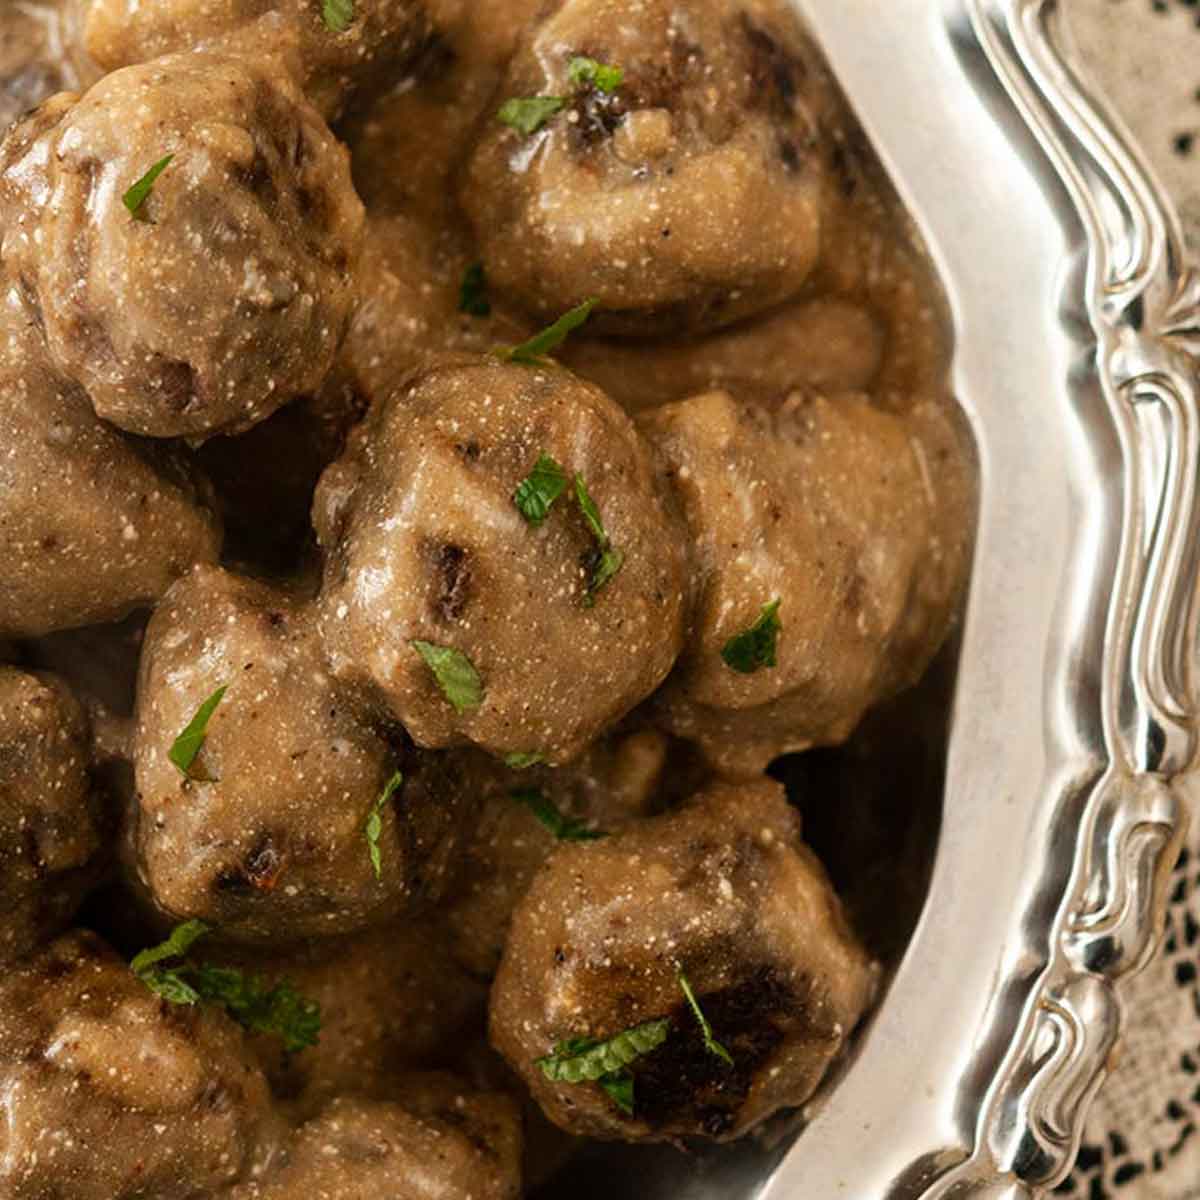 Swedish meatballs in a silver bowl on a lace tablecloth.